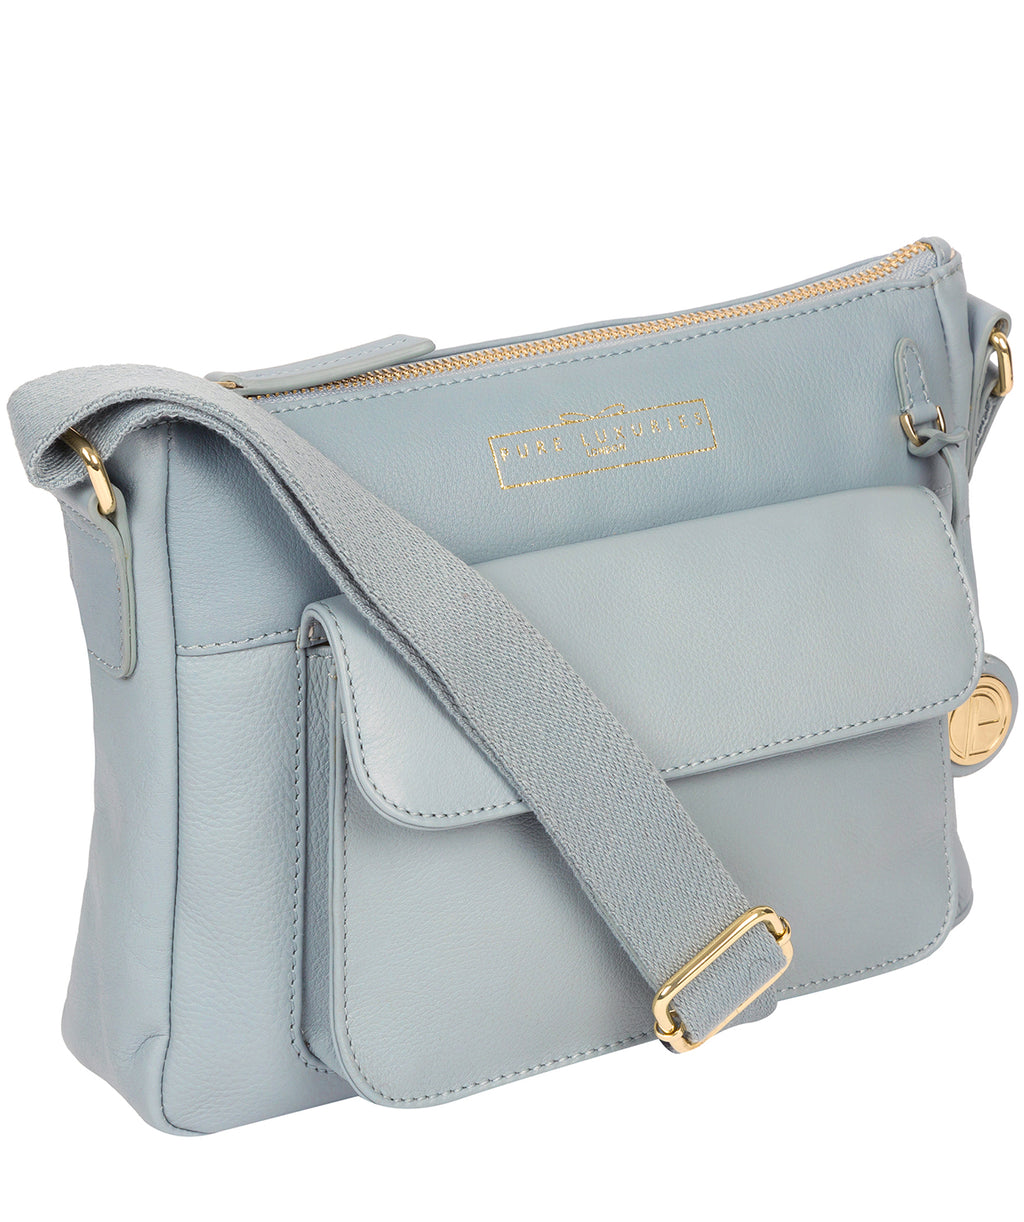 Blue Leather Shoulder Bag 'Tindall' by Pure Luxuries – Pure Luxuries London